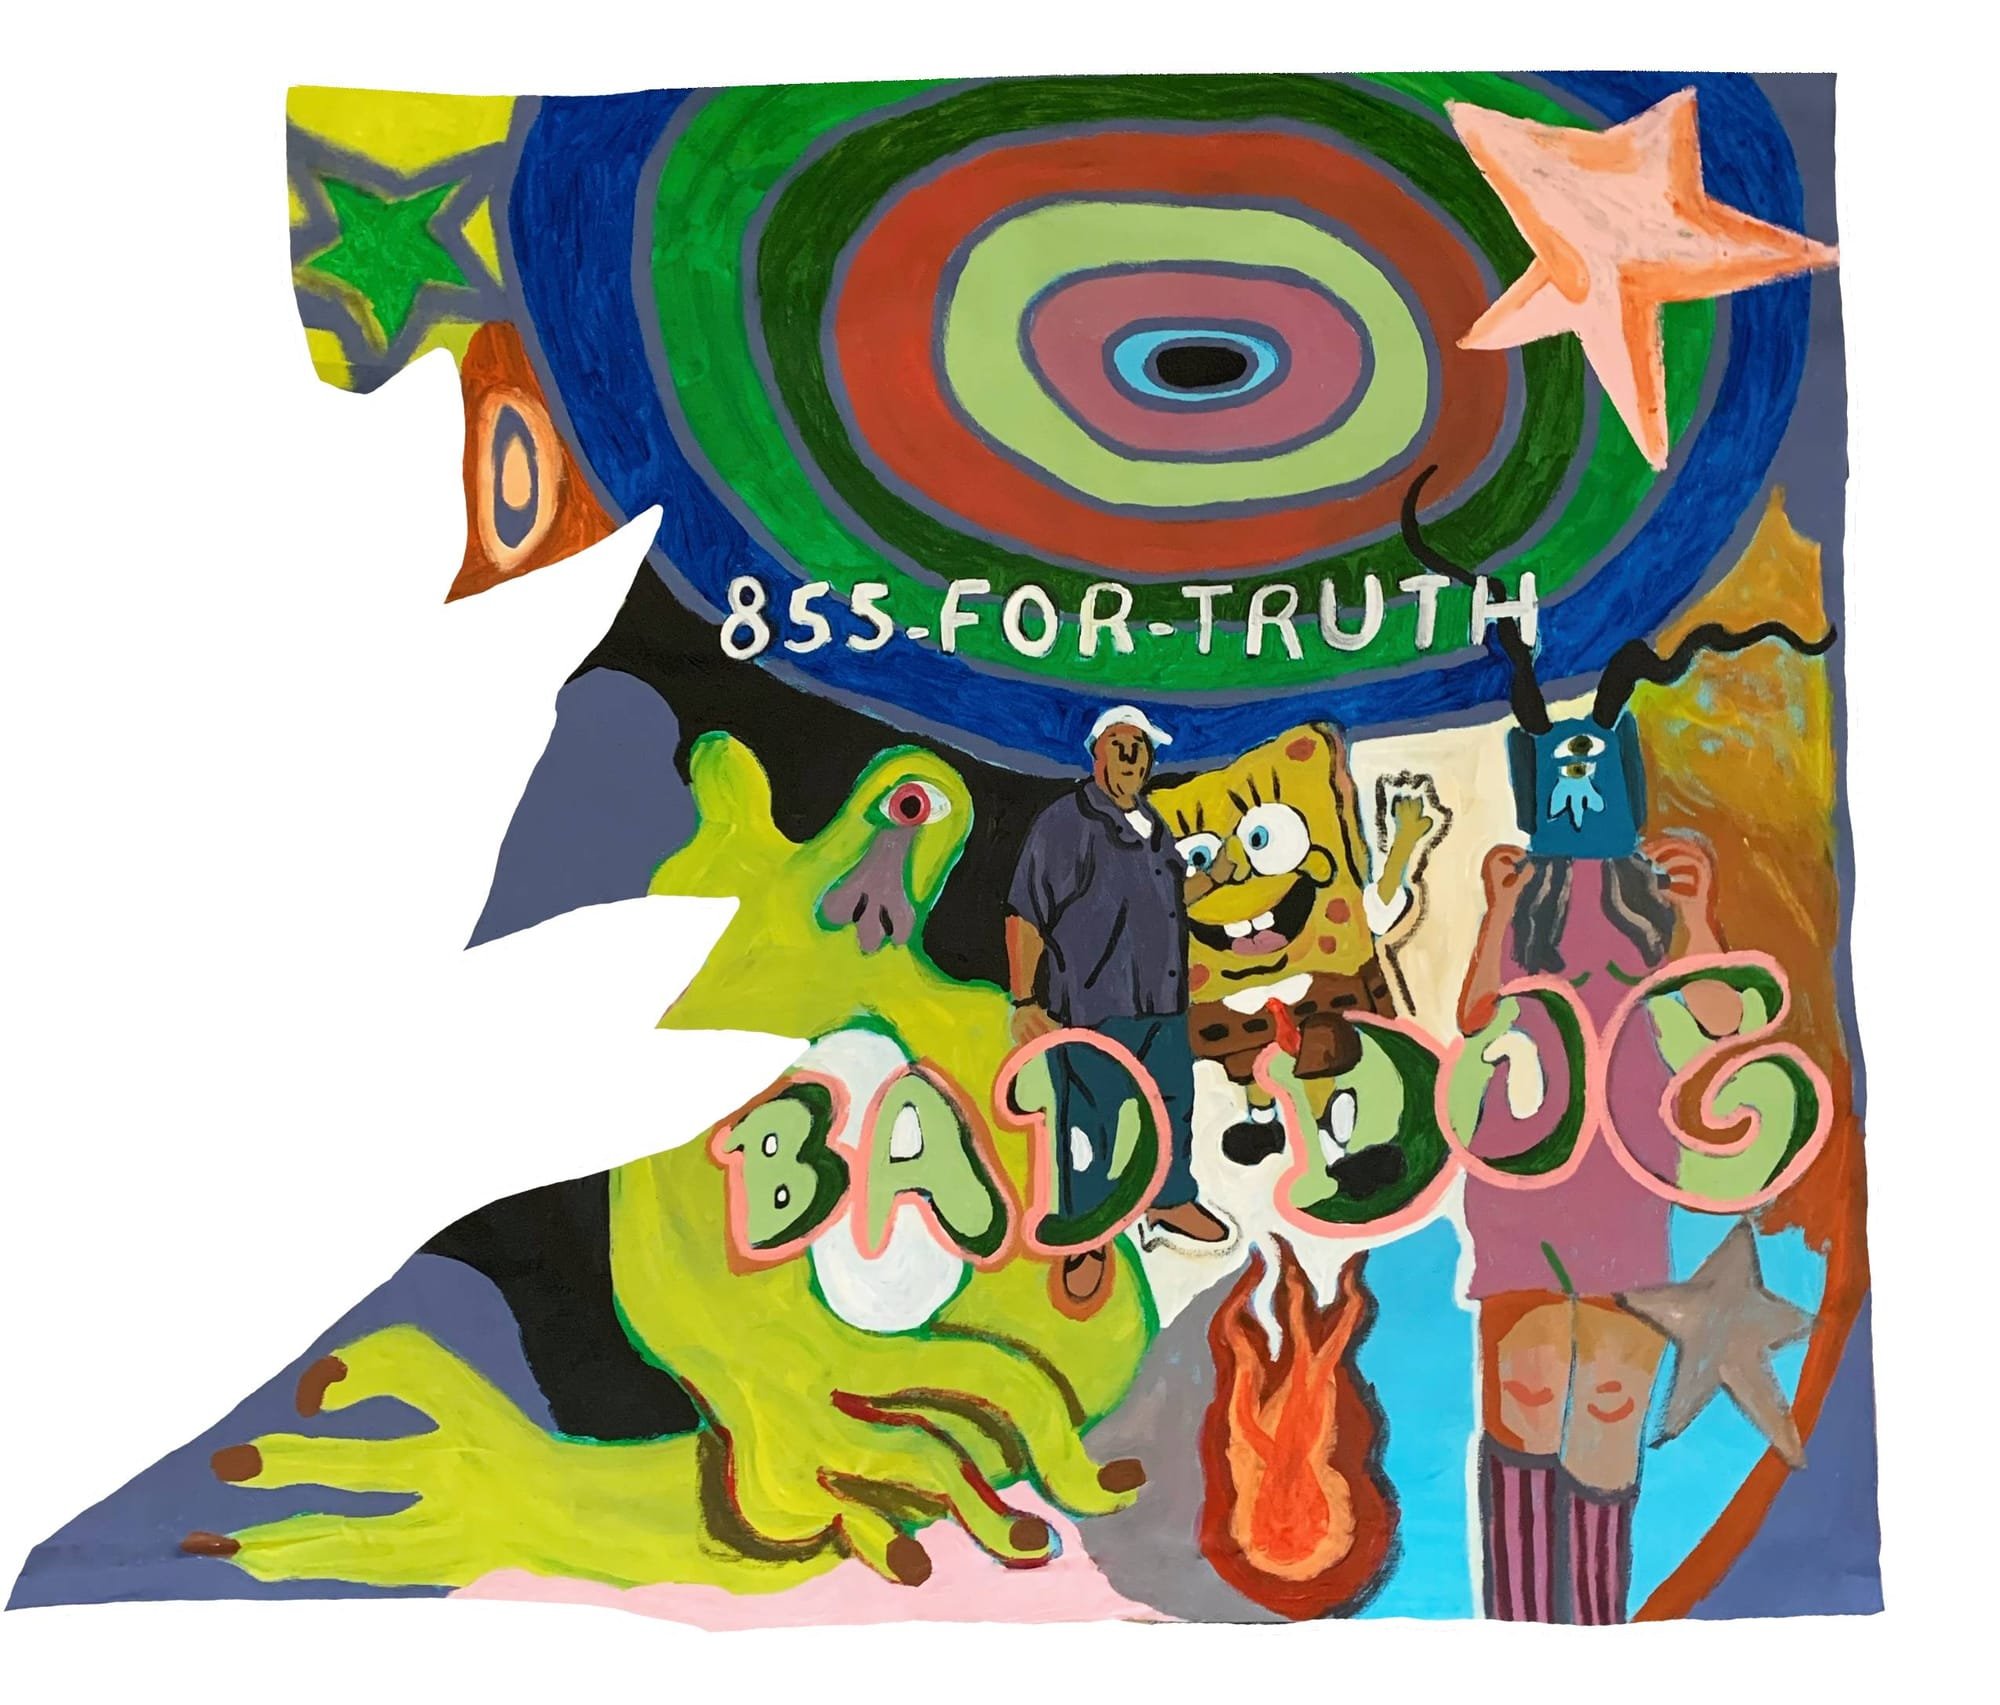 855-FOR-TRUTH